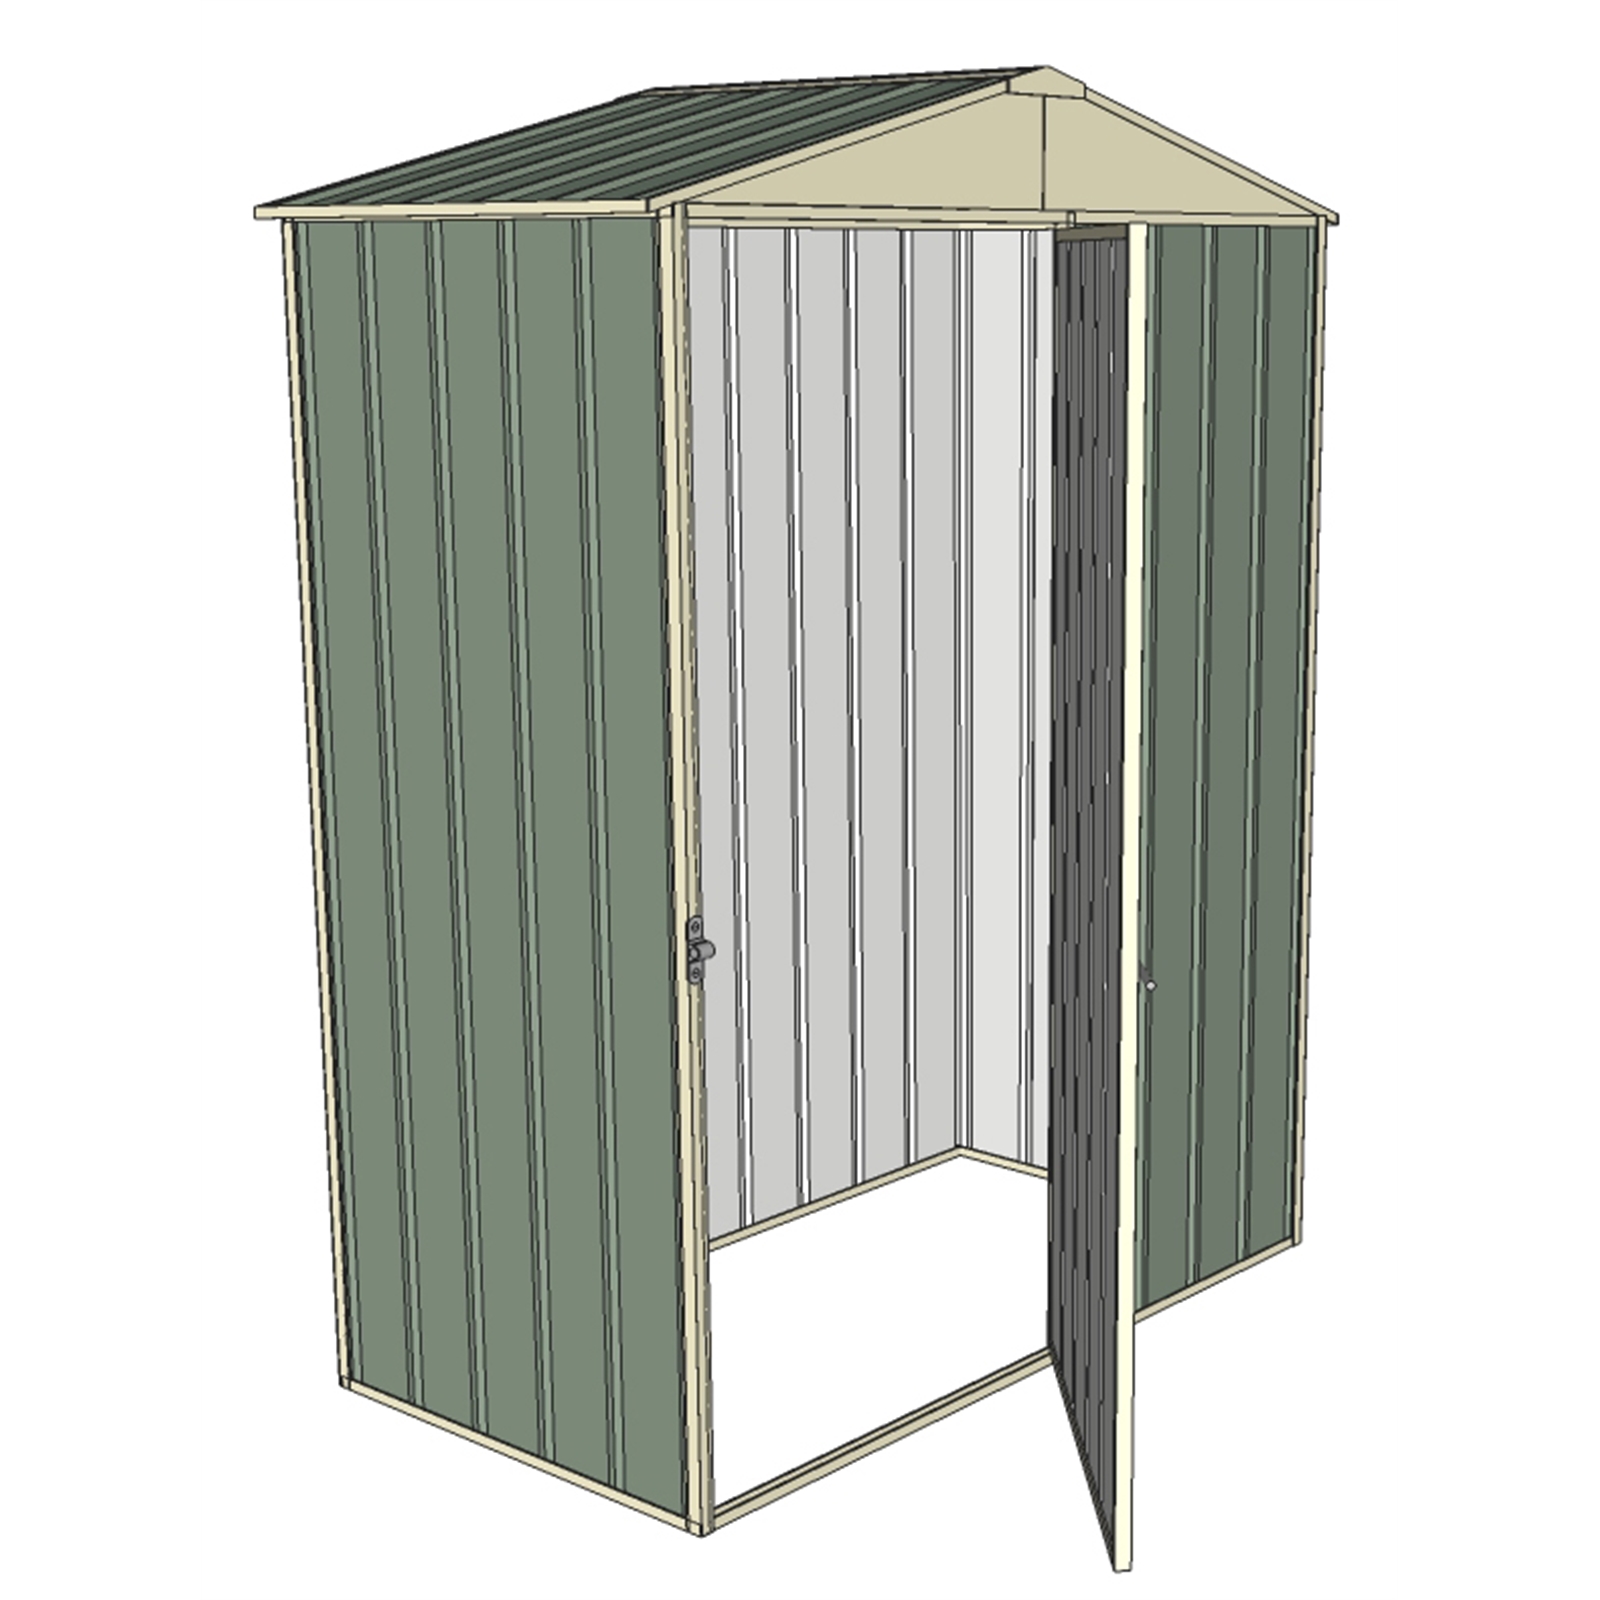 Build-a-Shed 1.5 x 2.3 x 0.8m Green Front Gable Single Hinged Door Narrow Shed